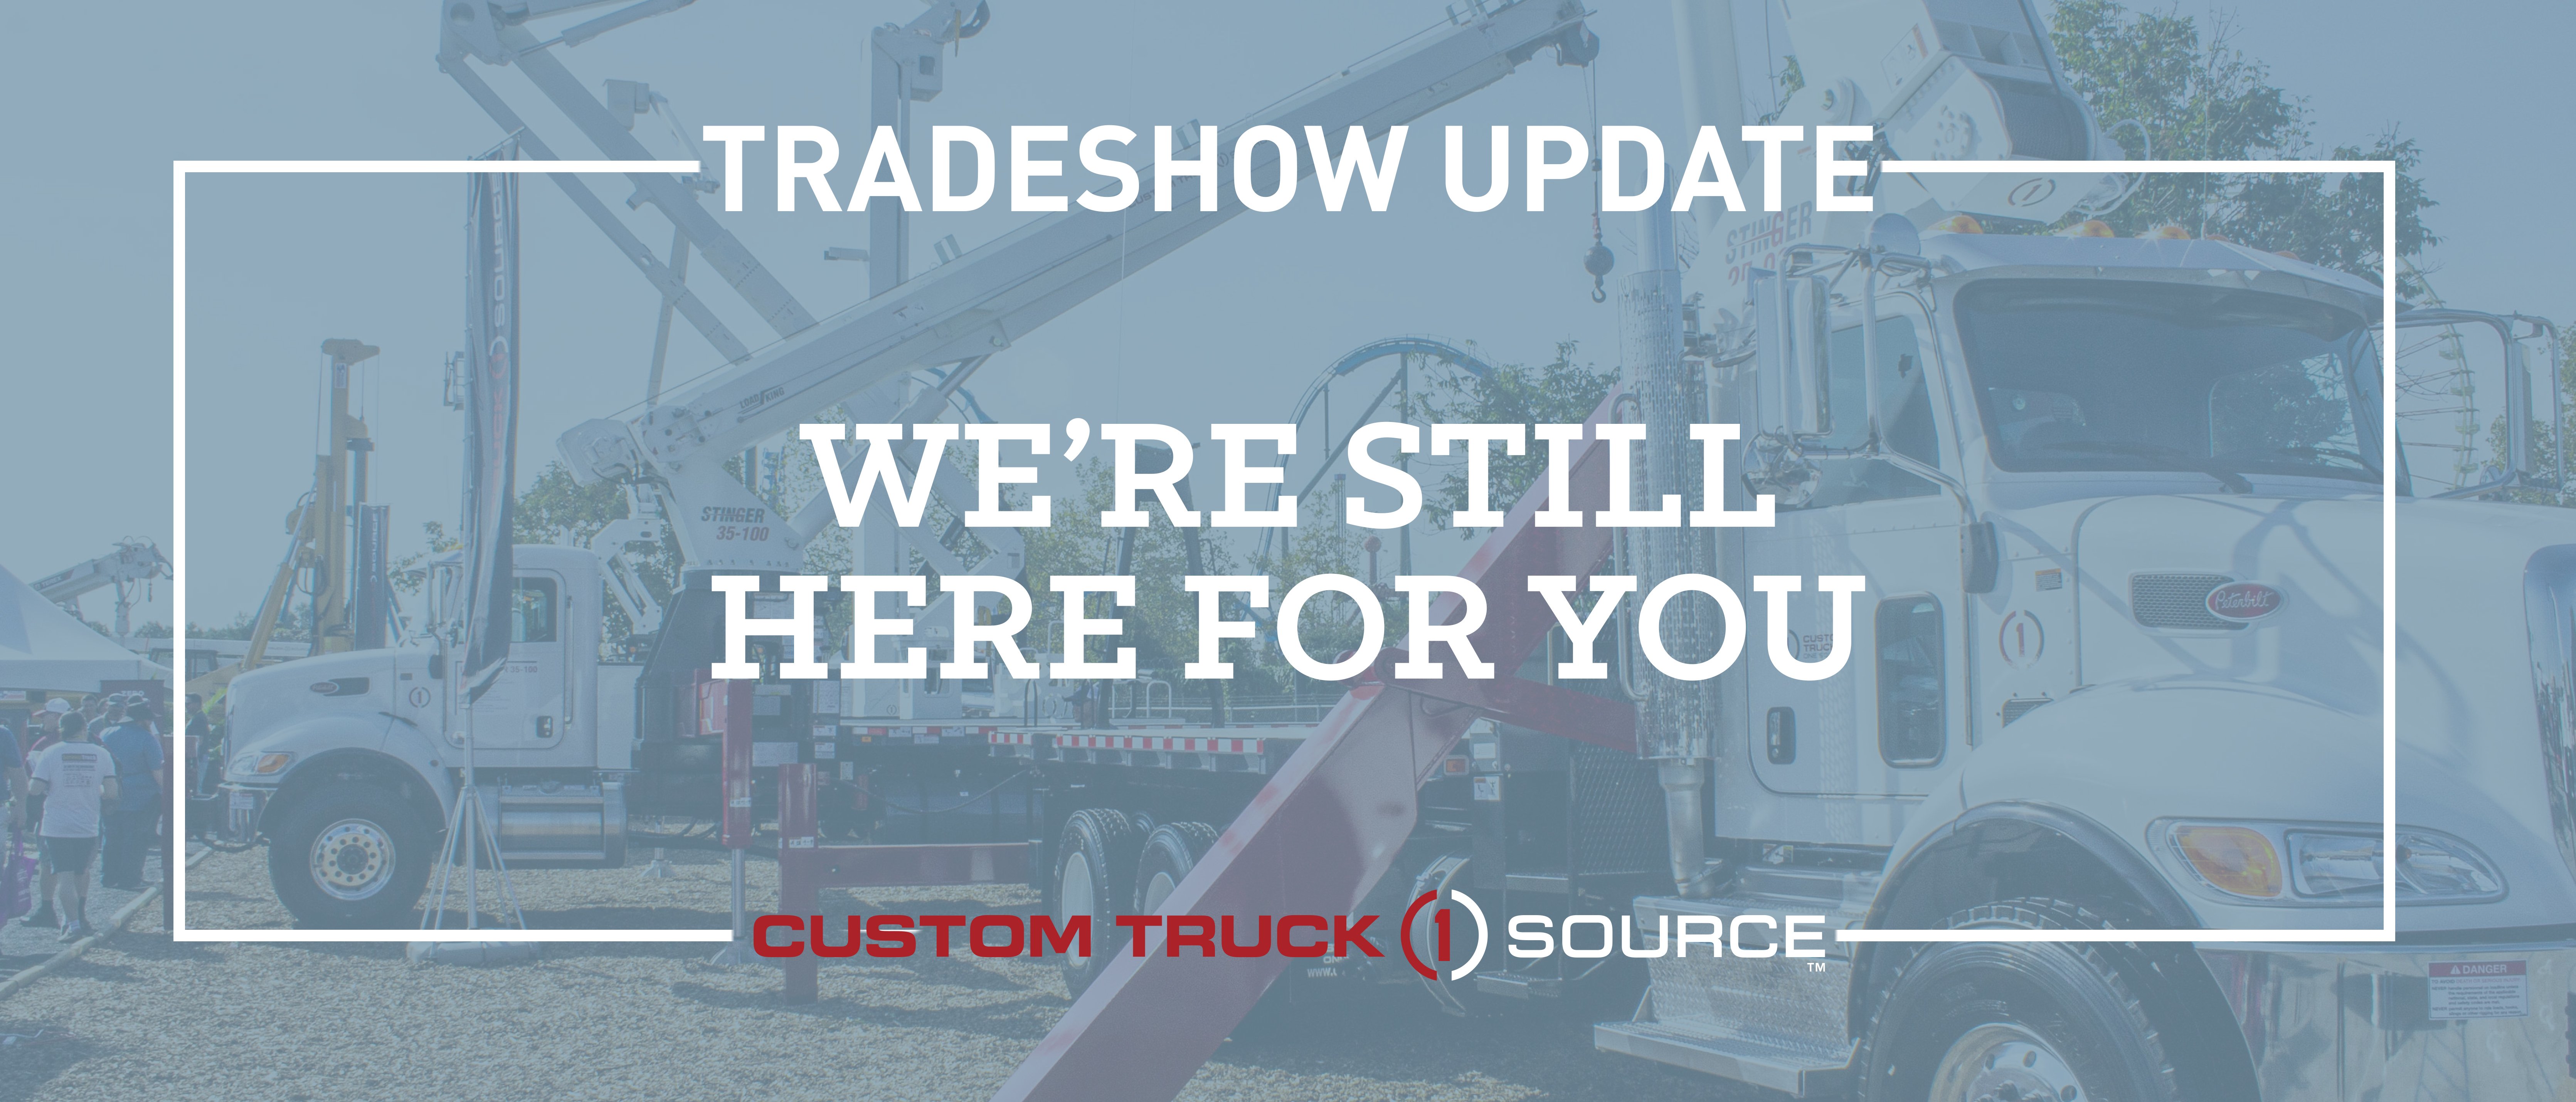 Tradeshow Email_Here For You